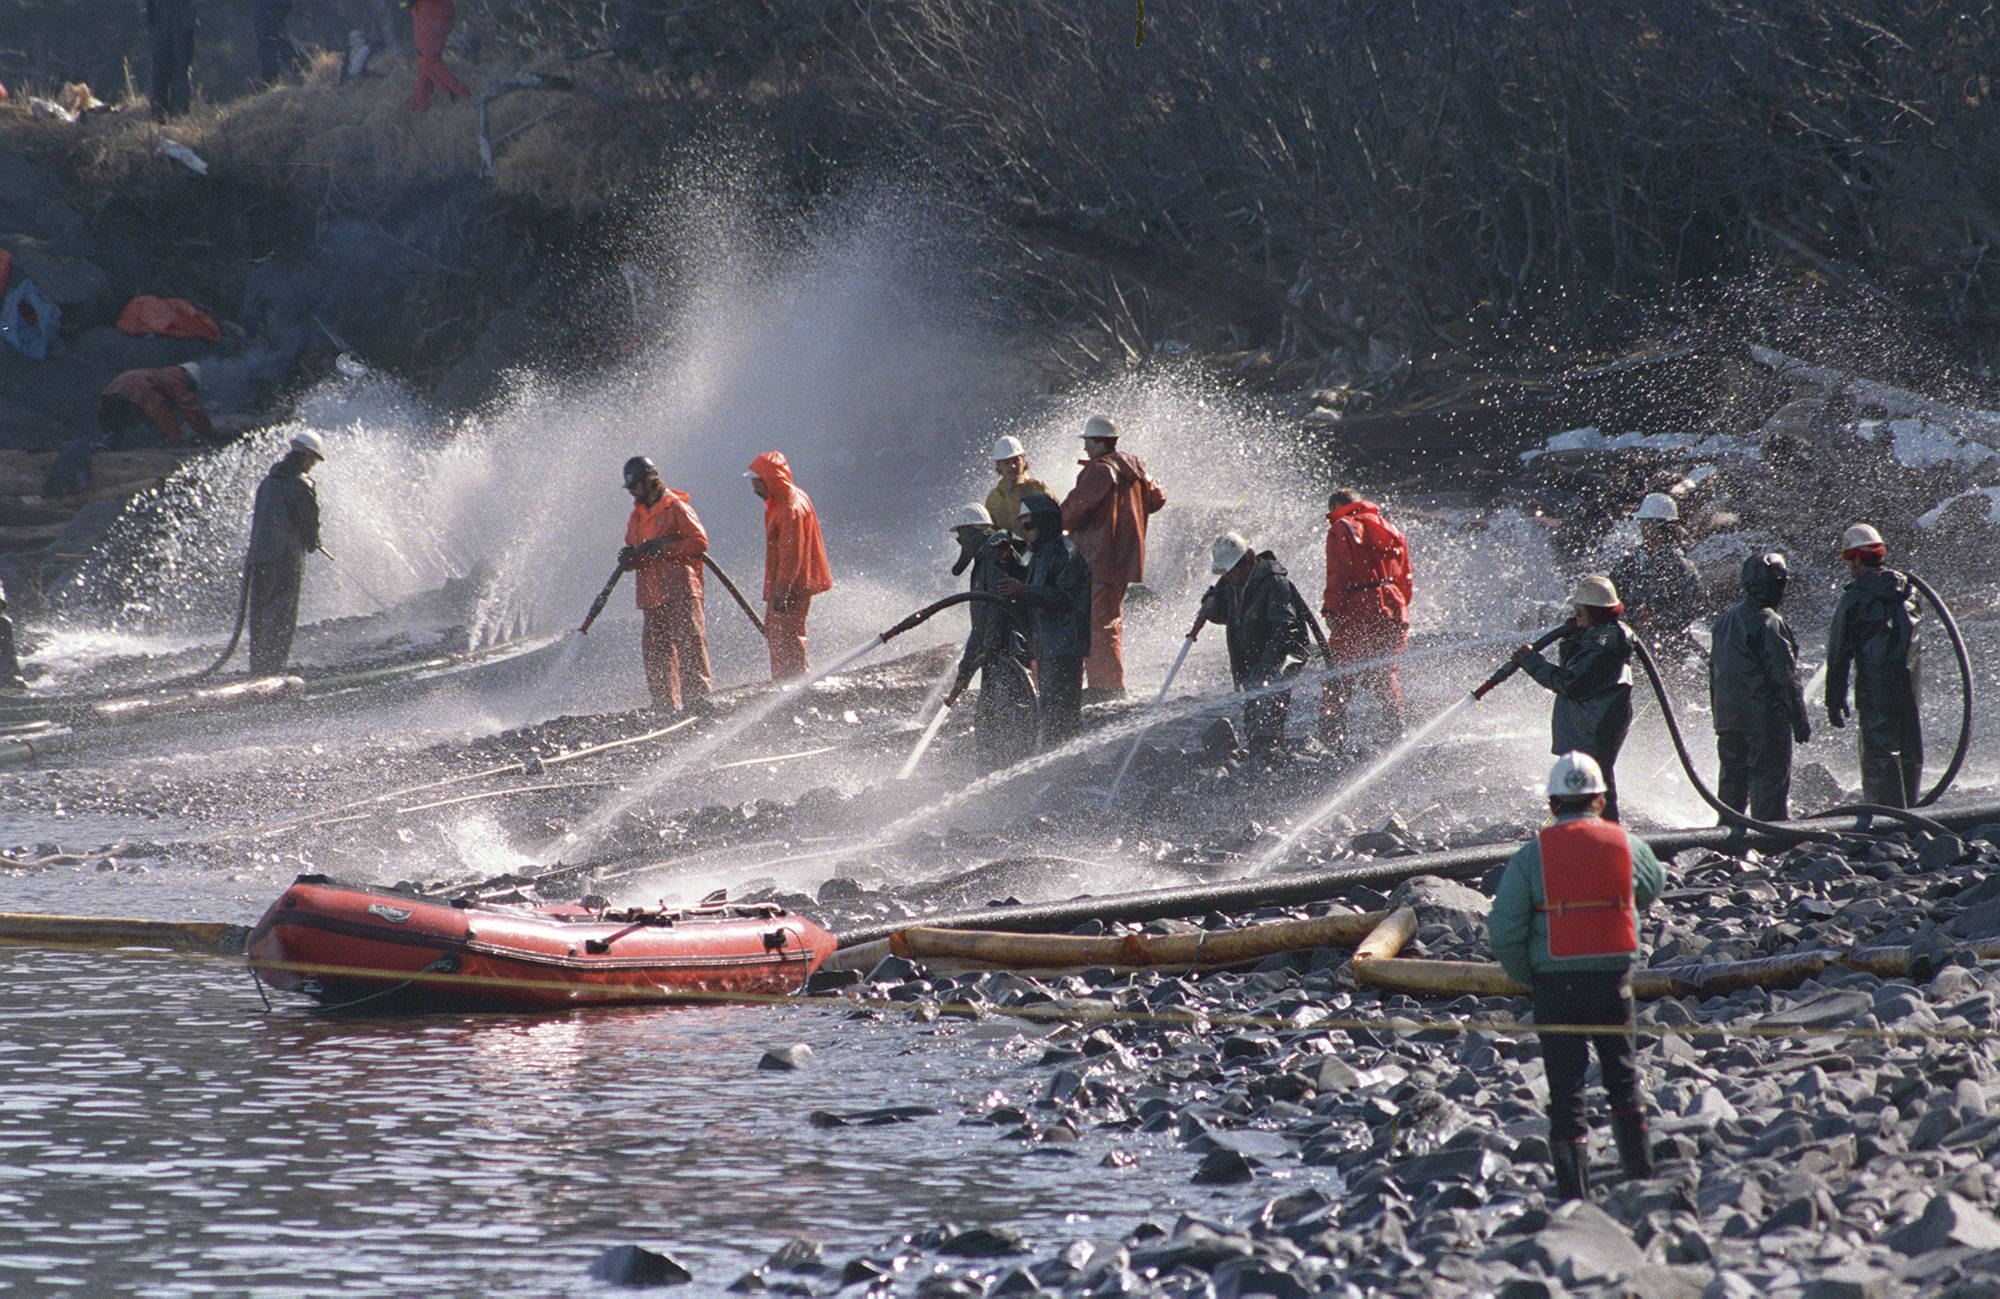 In this April 21, 1989 photo, crews use high pressured hoses to blast the rocks on this beachfront on Naked Island, Alaska. Just after midnight on March 24, 1989, an Exxon Shipping Co. tanker ran aground outside the town of Valdez, Alaska, spewing millions of gallons of thick, toxic crude oil into the pristine Prince William Sound. (Rob Stapleton | Associated Press File)